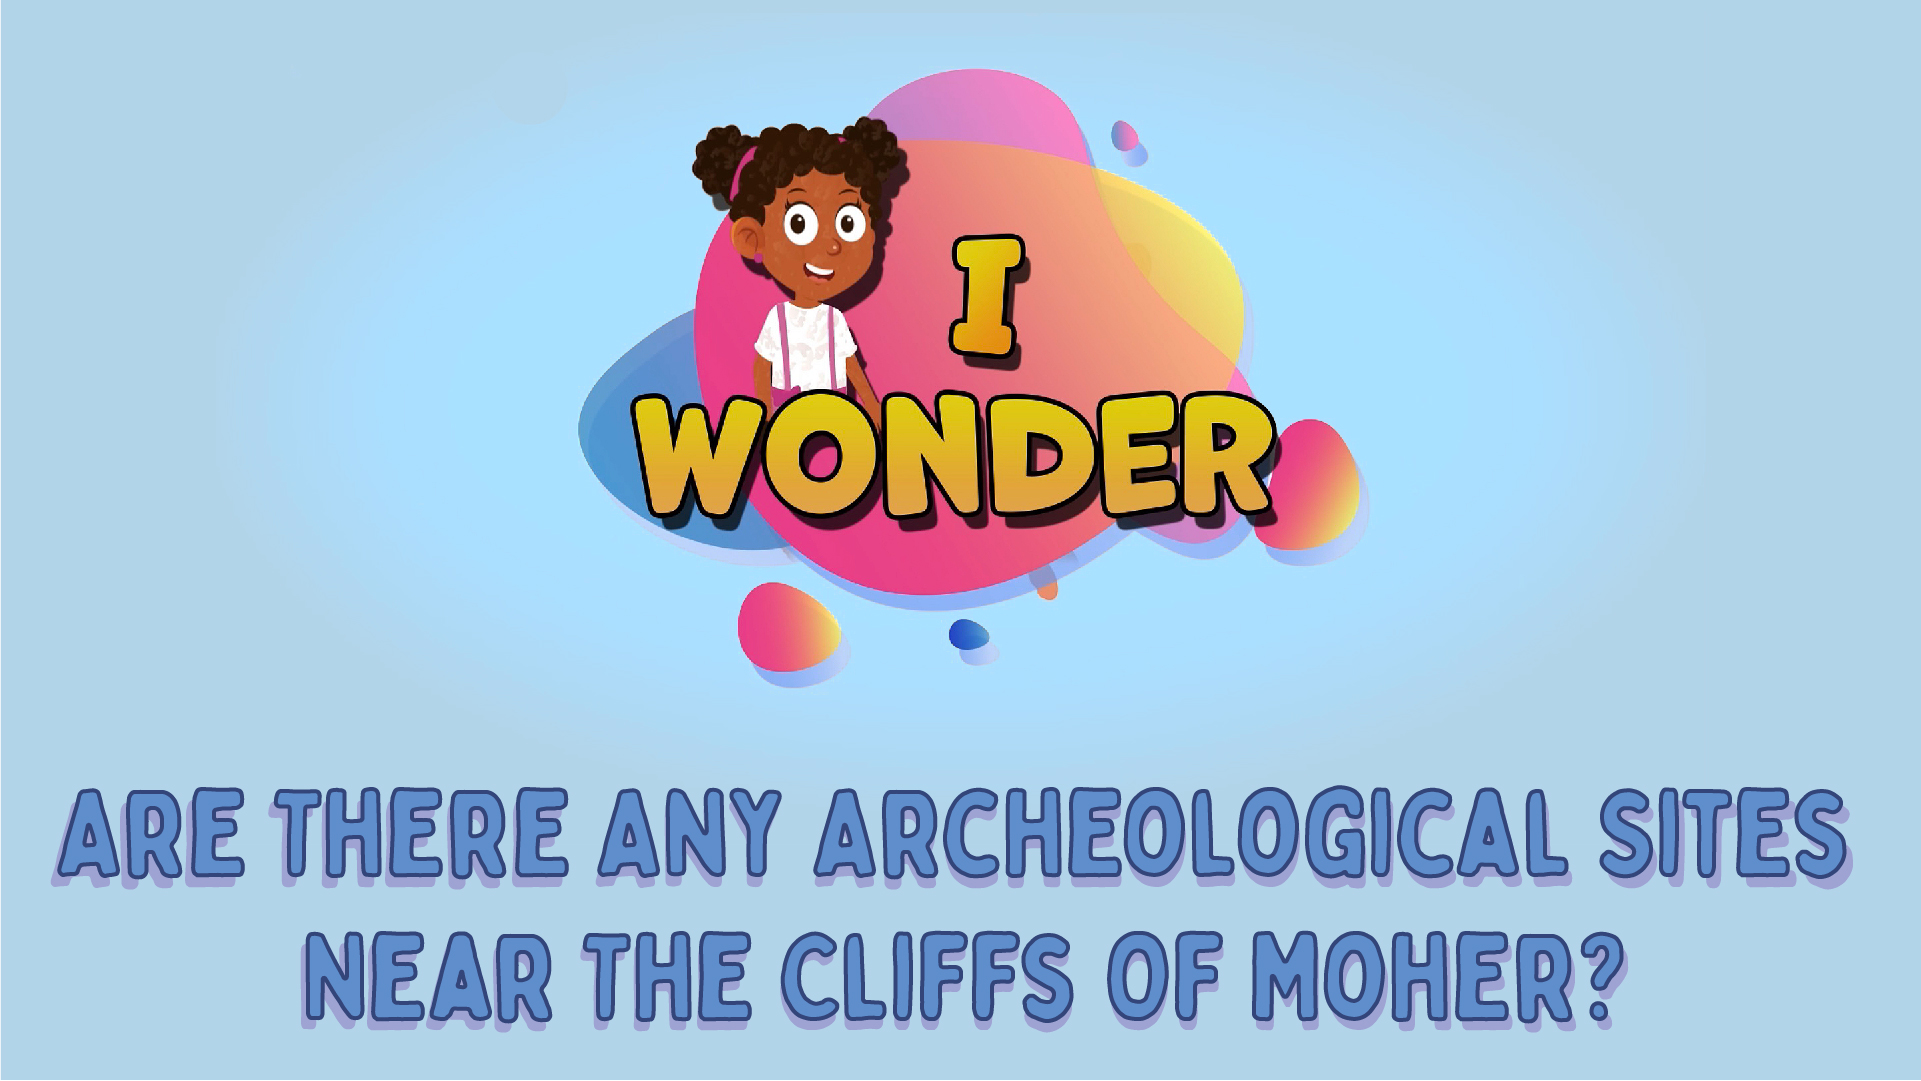 Are There Any Archeological Sites Near The Cliffs Of Moher?